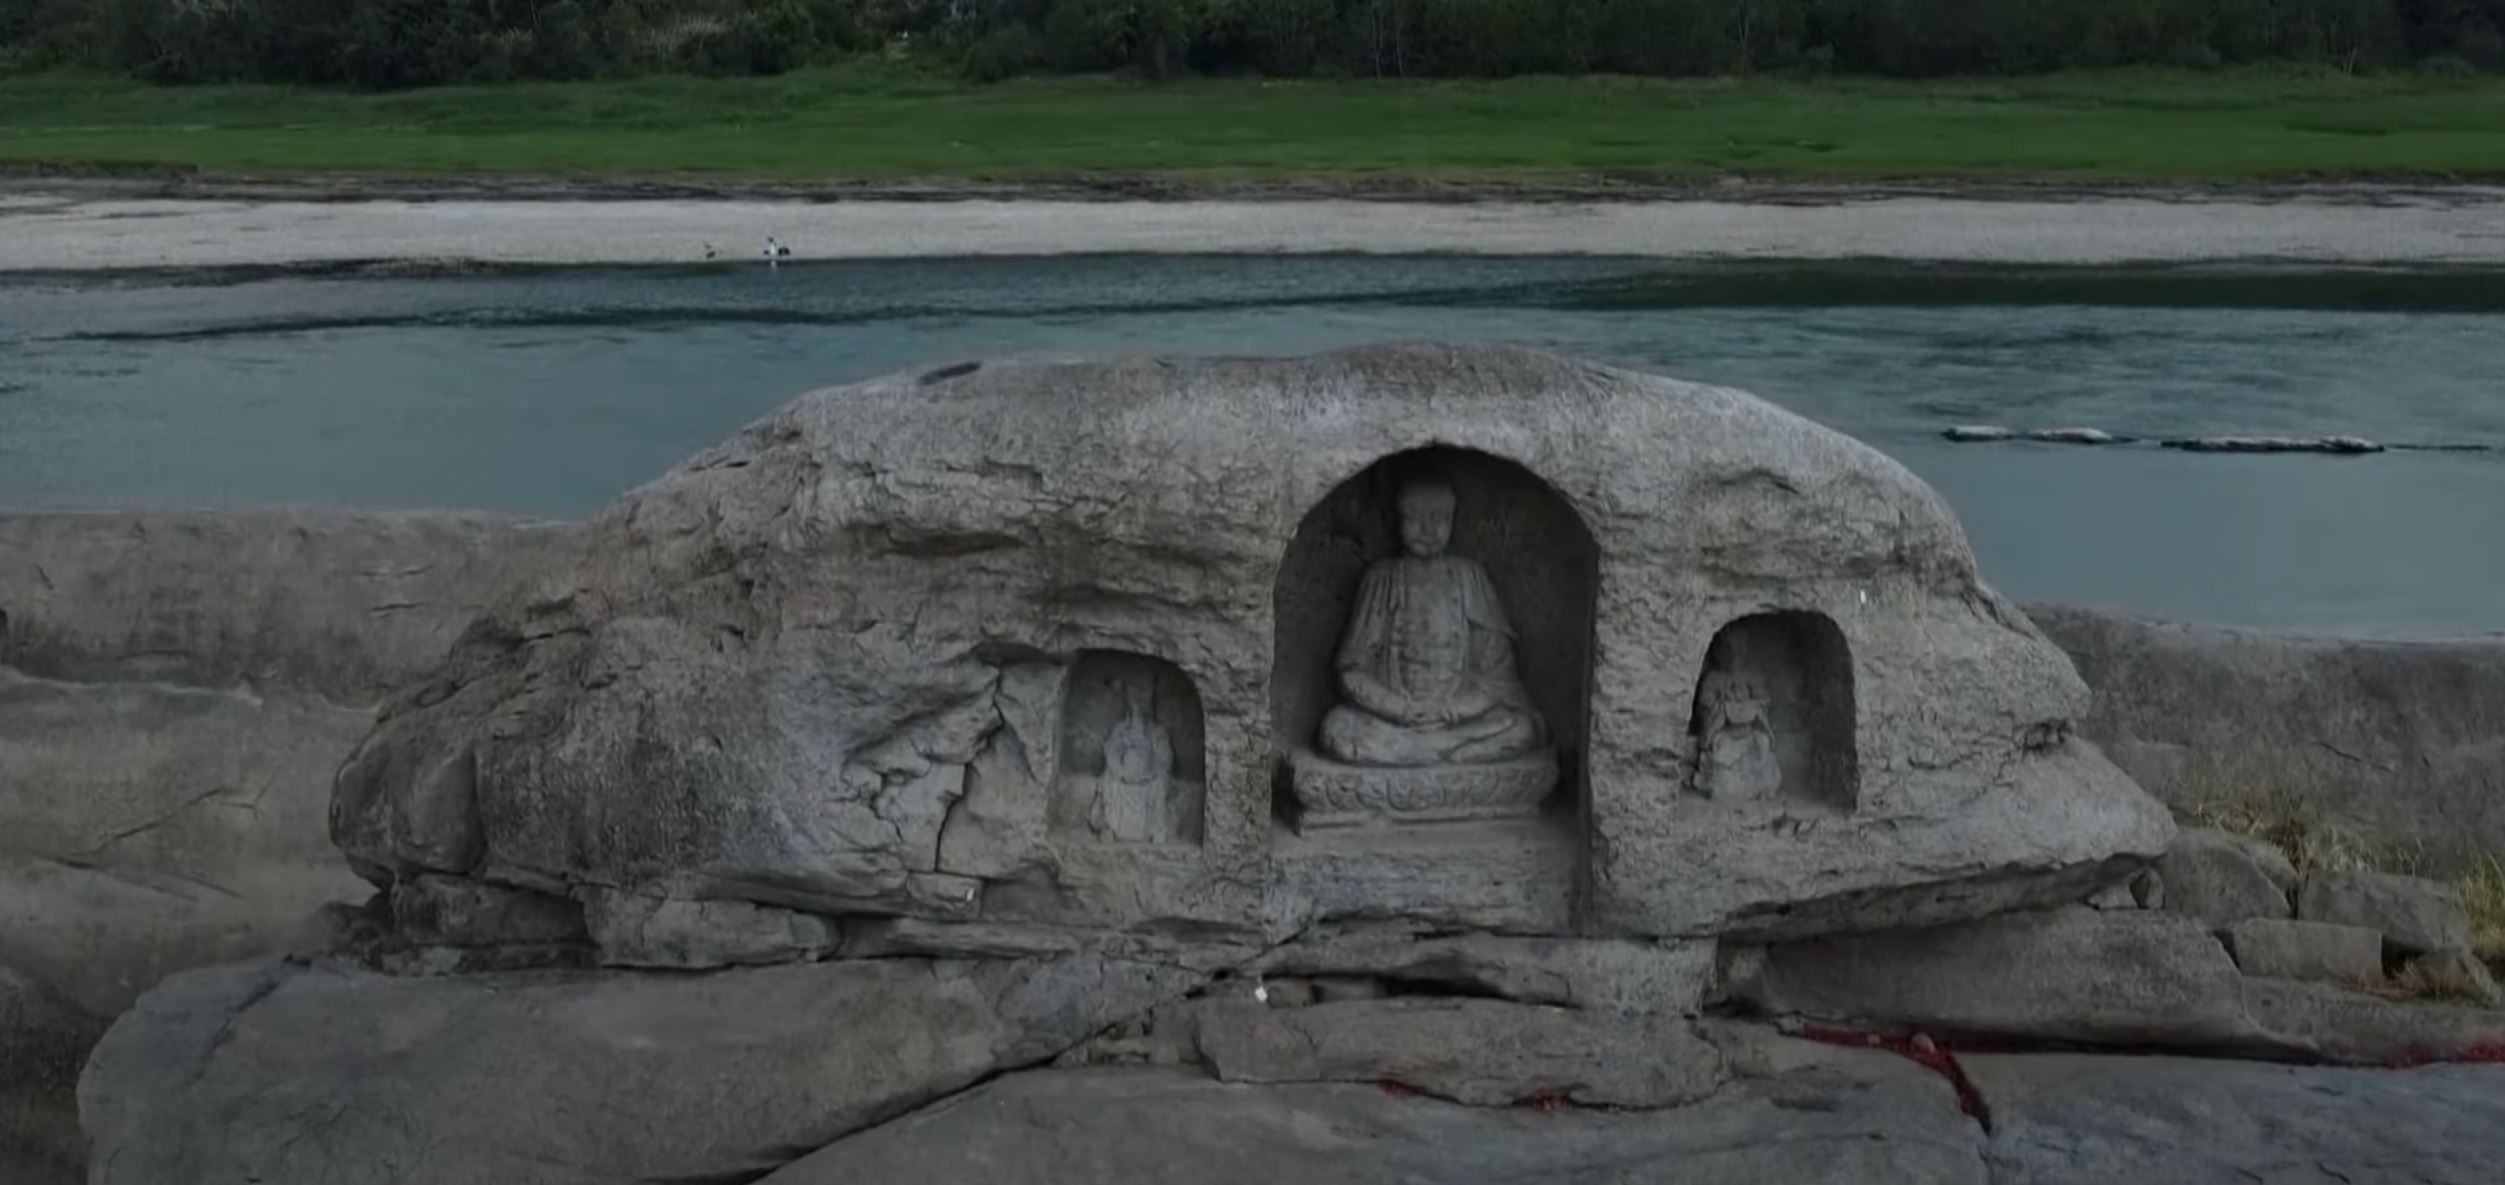 A screengrab from a YouTube video showing the ancient statues. Image Credit: YouTube - NBC News.